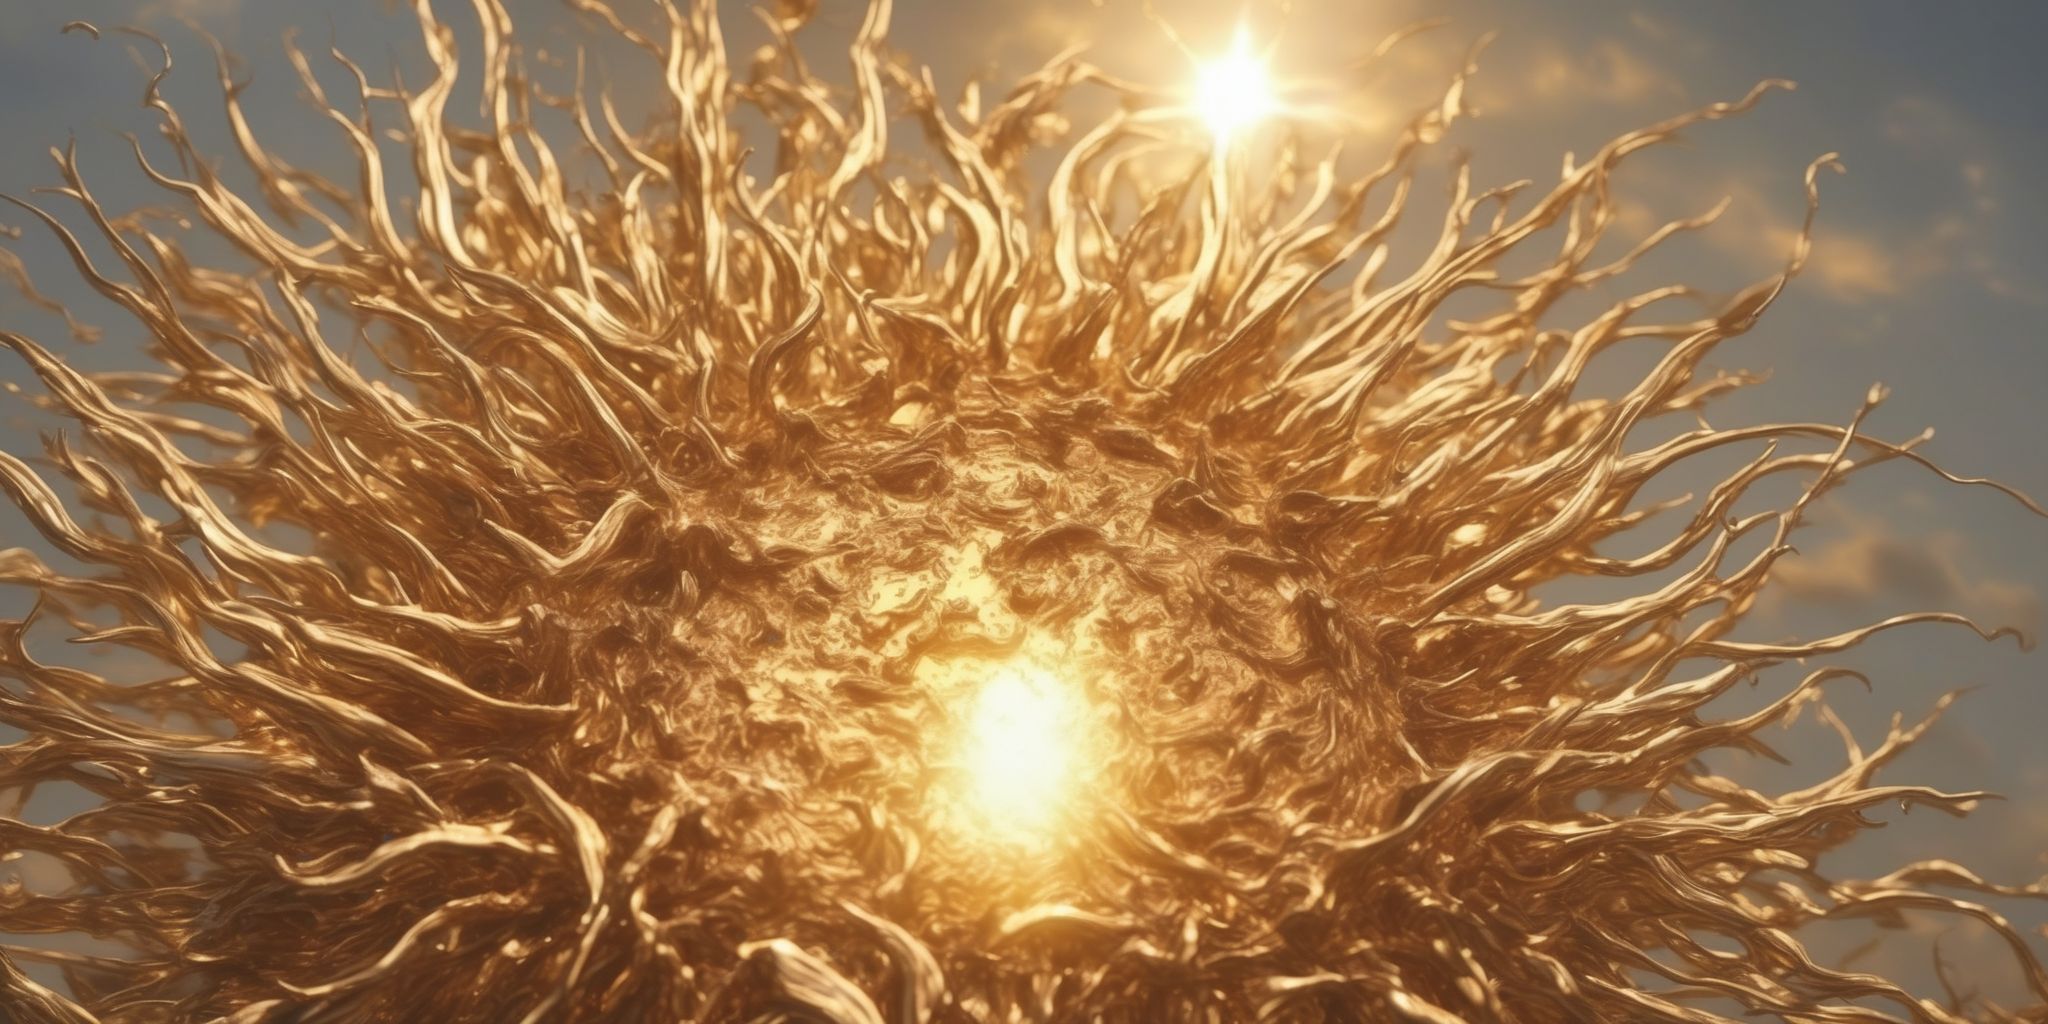 Sun  in realistic, photographic style